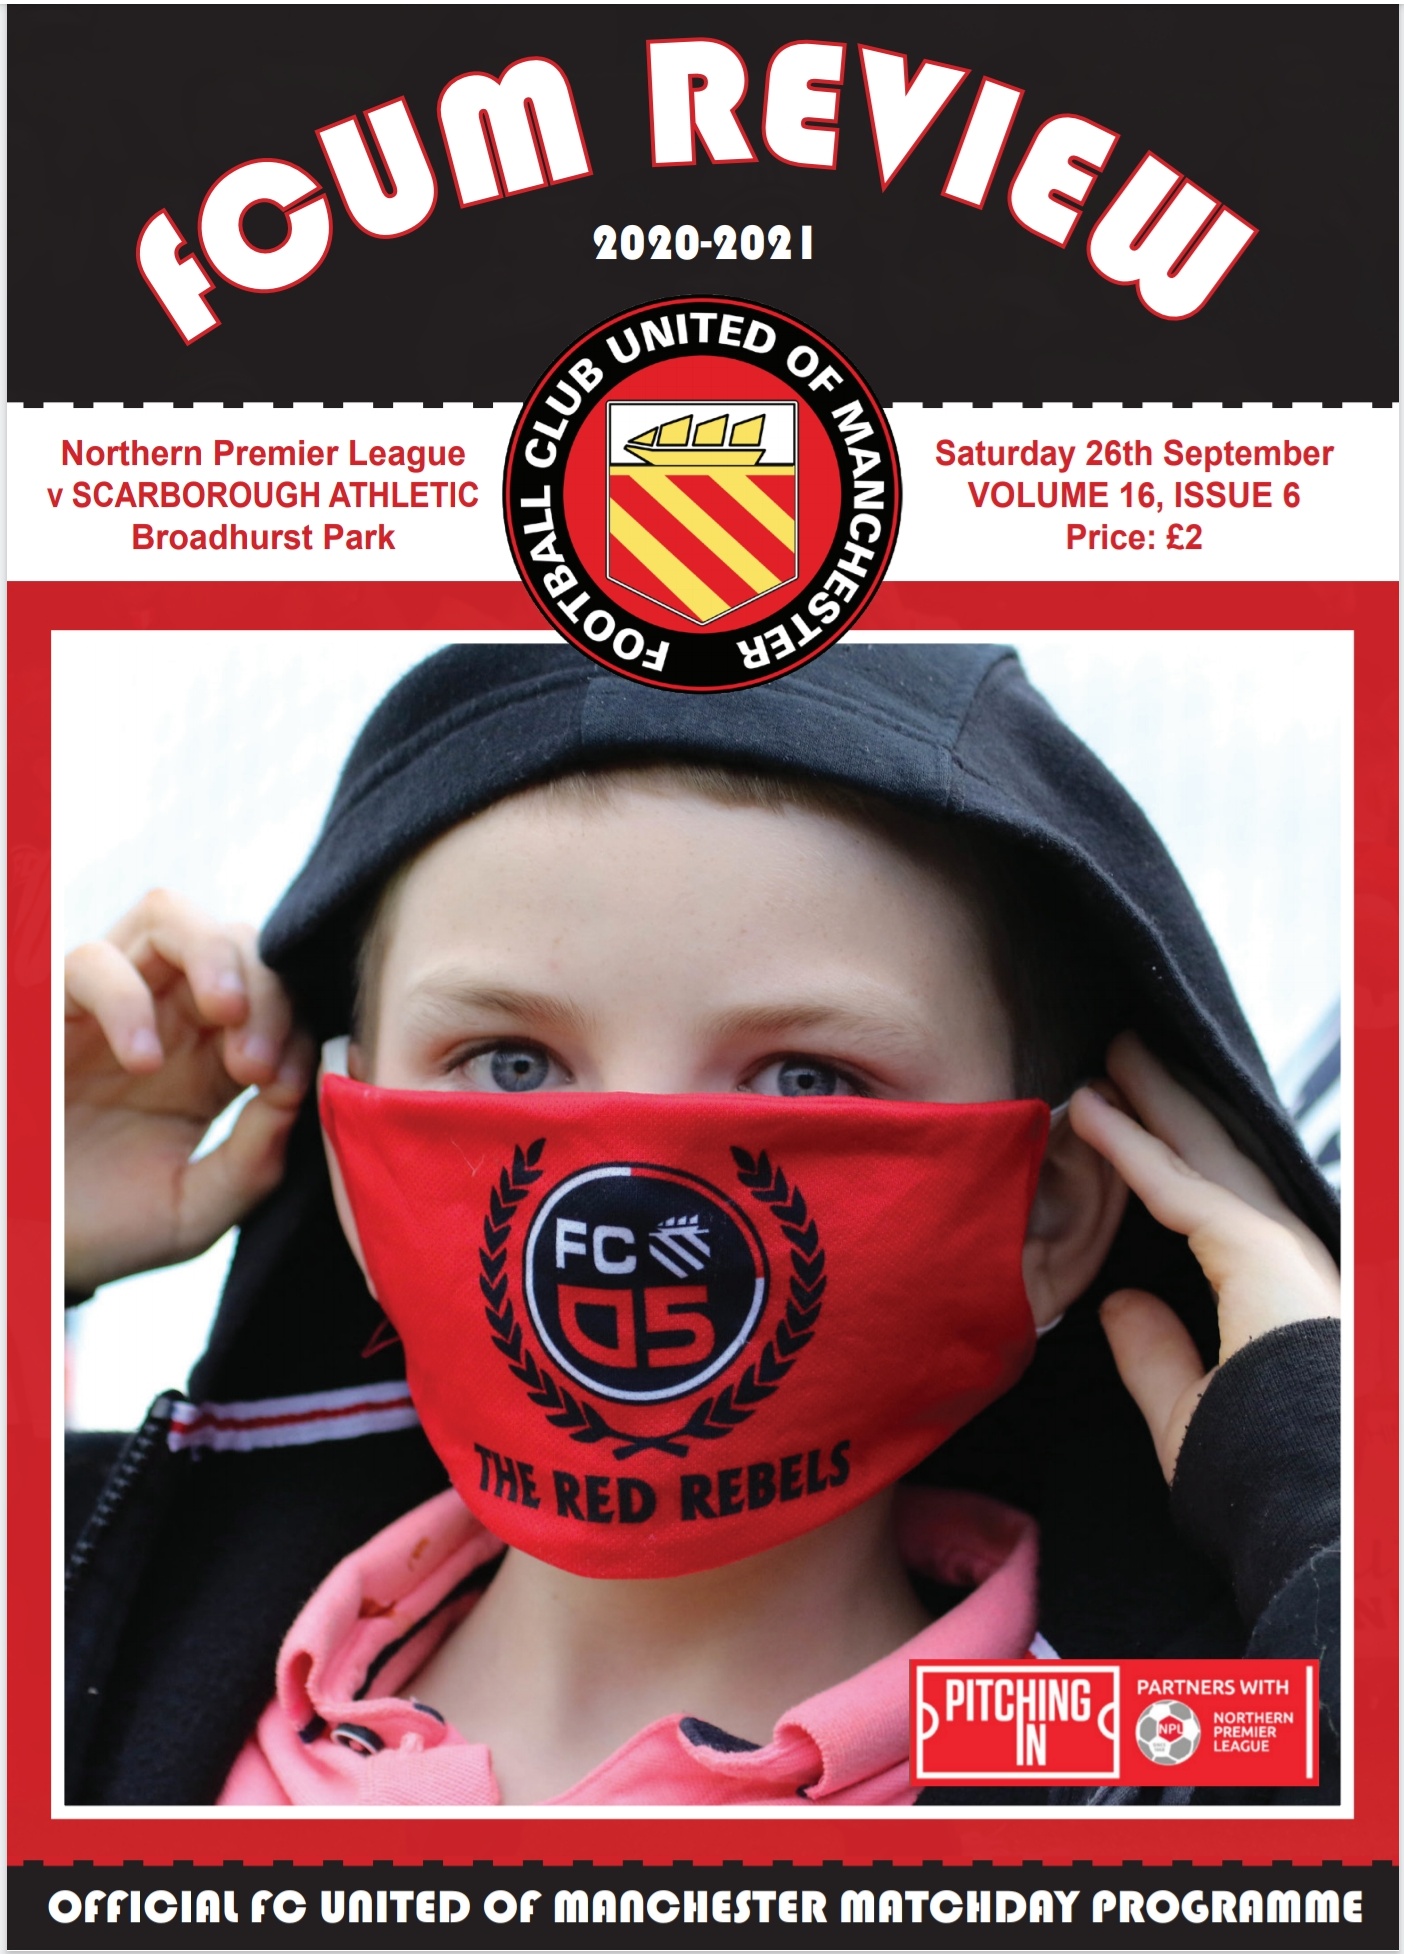 Scarborough Match Programme on sale today